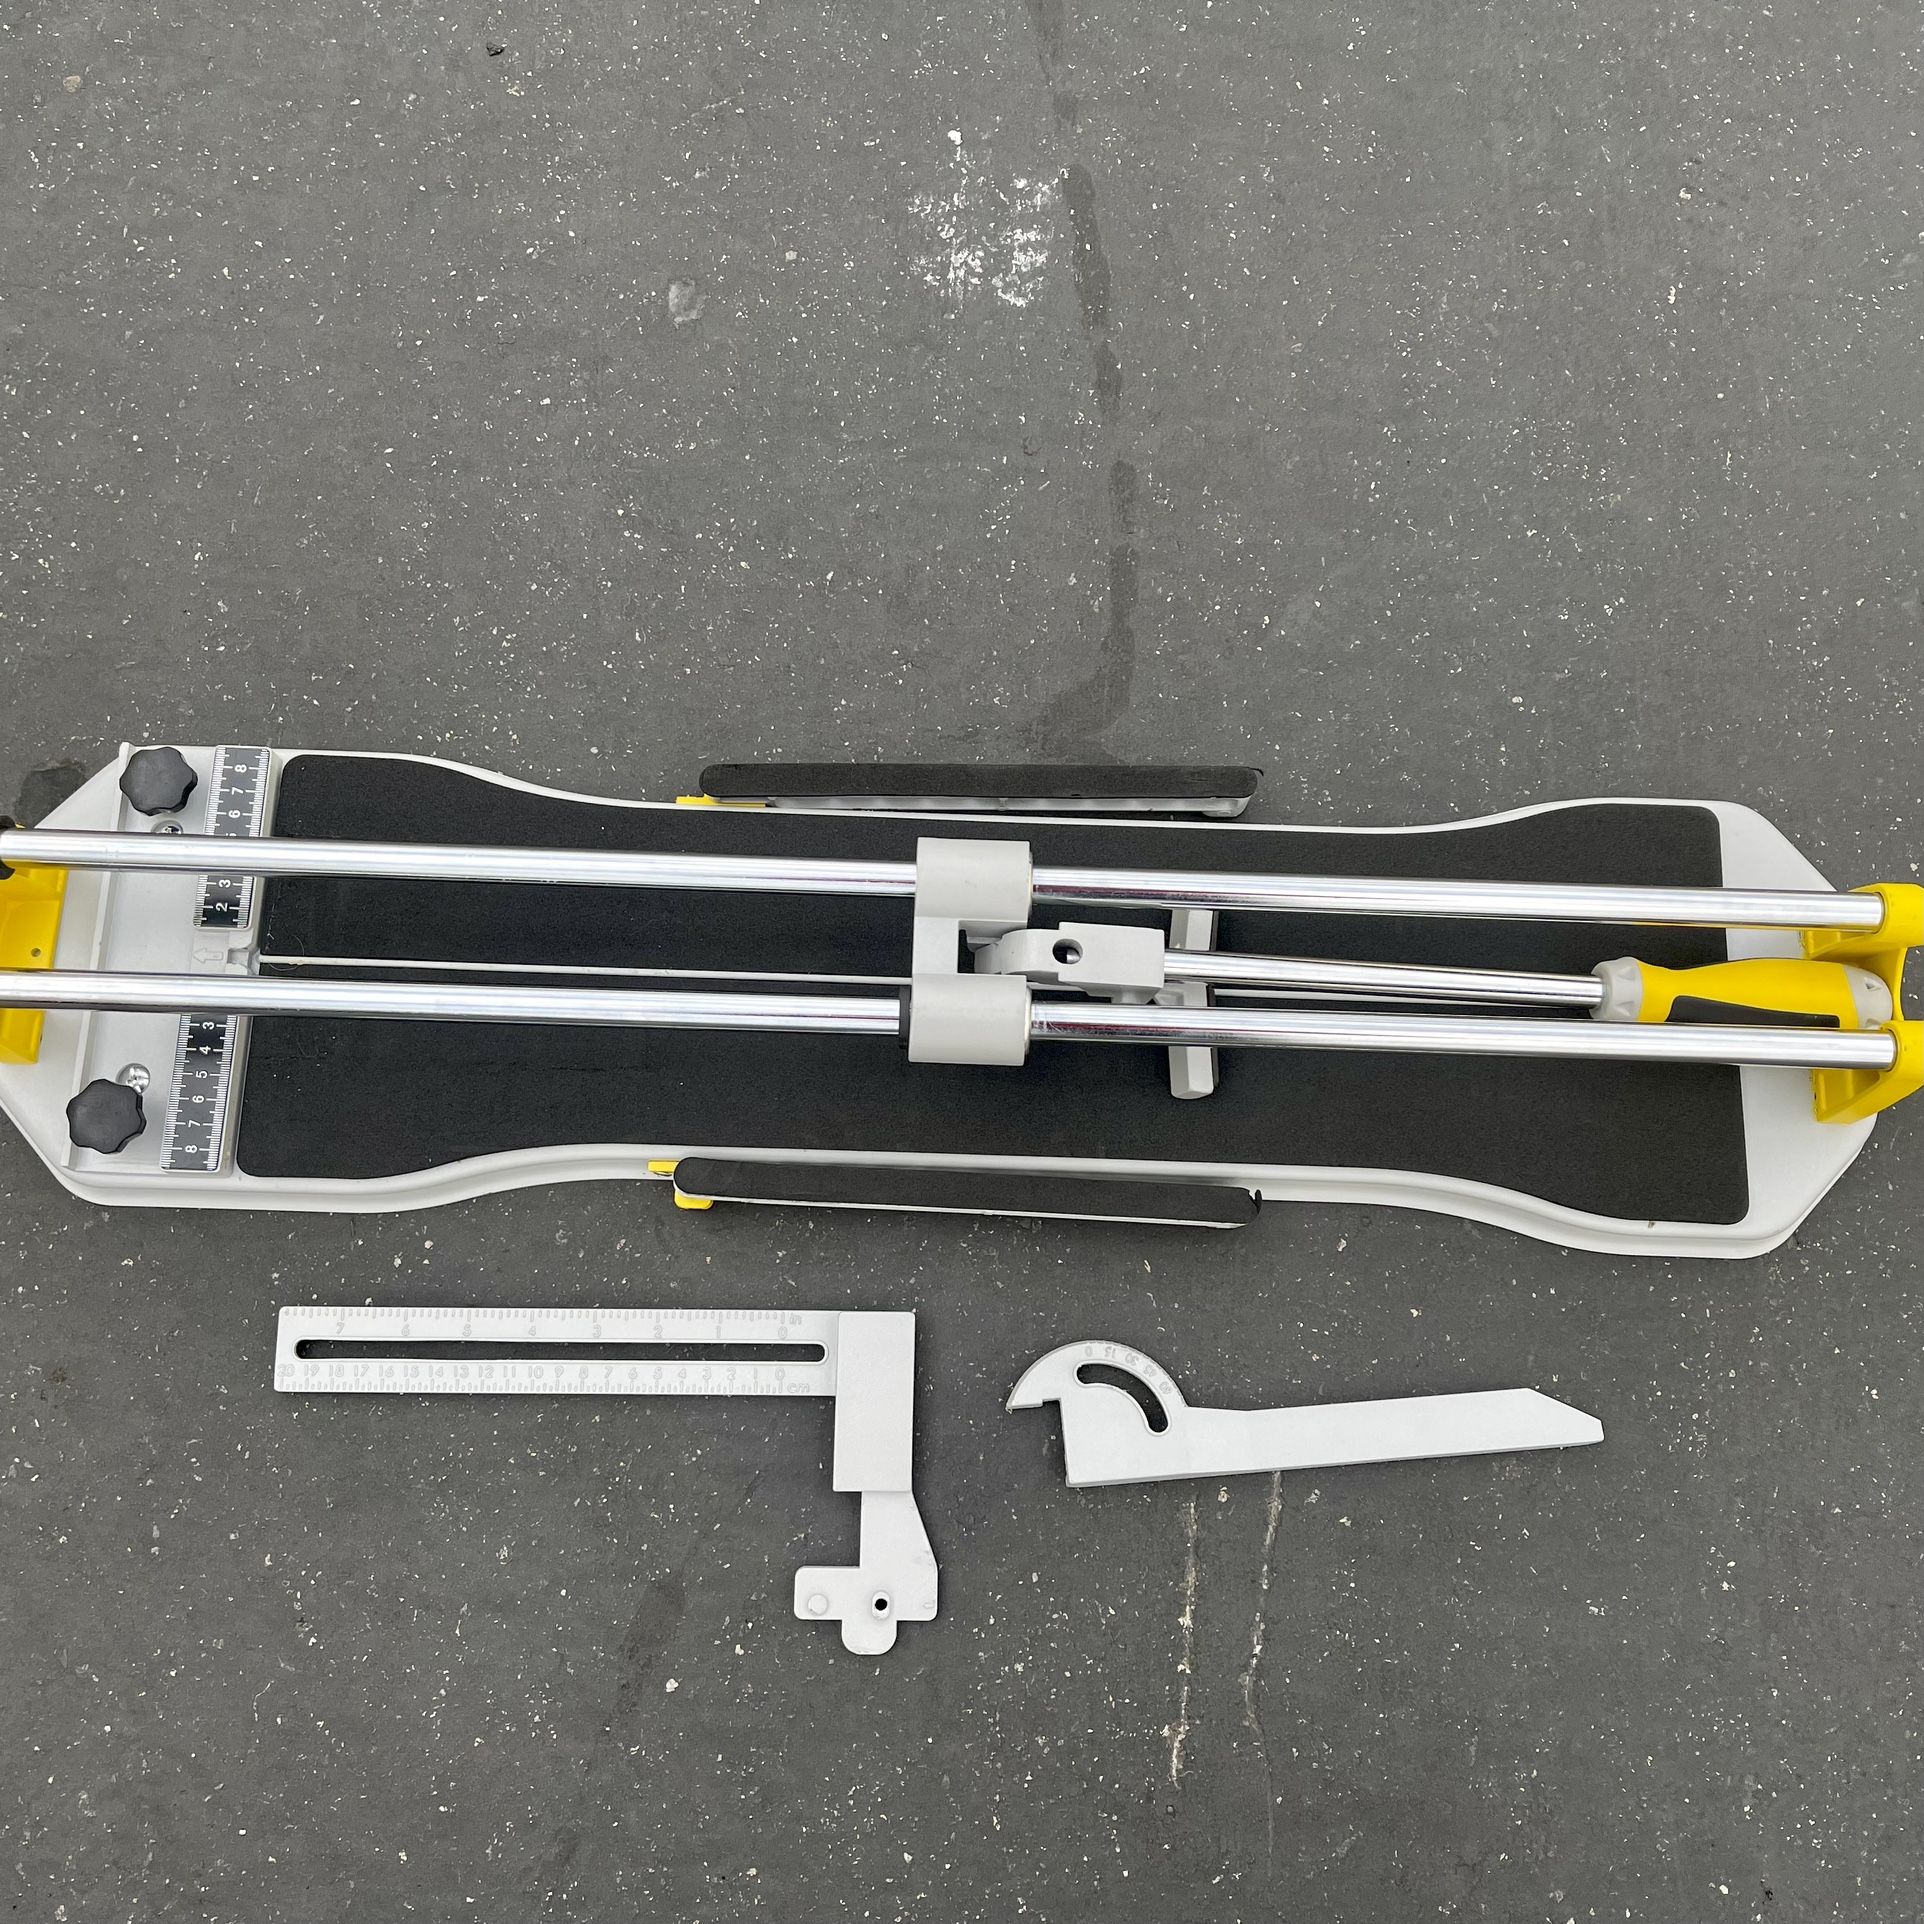 24 Inch Manual Tile Cutter, Cutting Wheel & Removable Scale, Cutting Thickness 0.55", W/ A Carry Bag